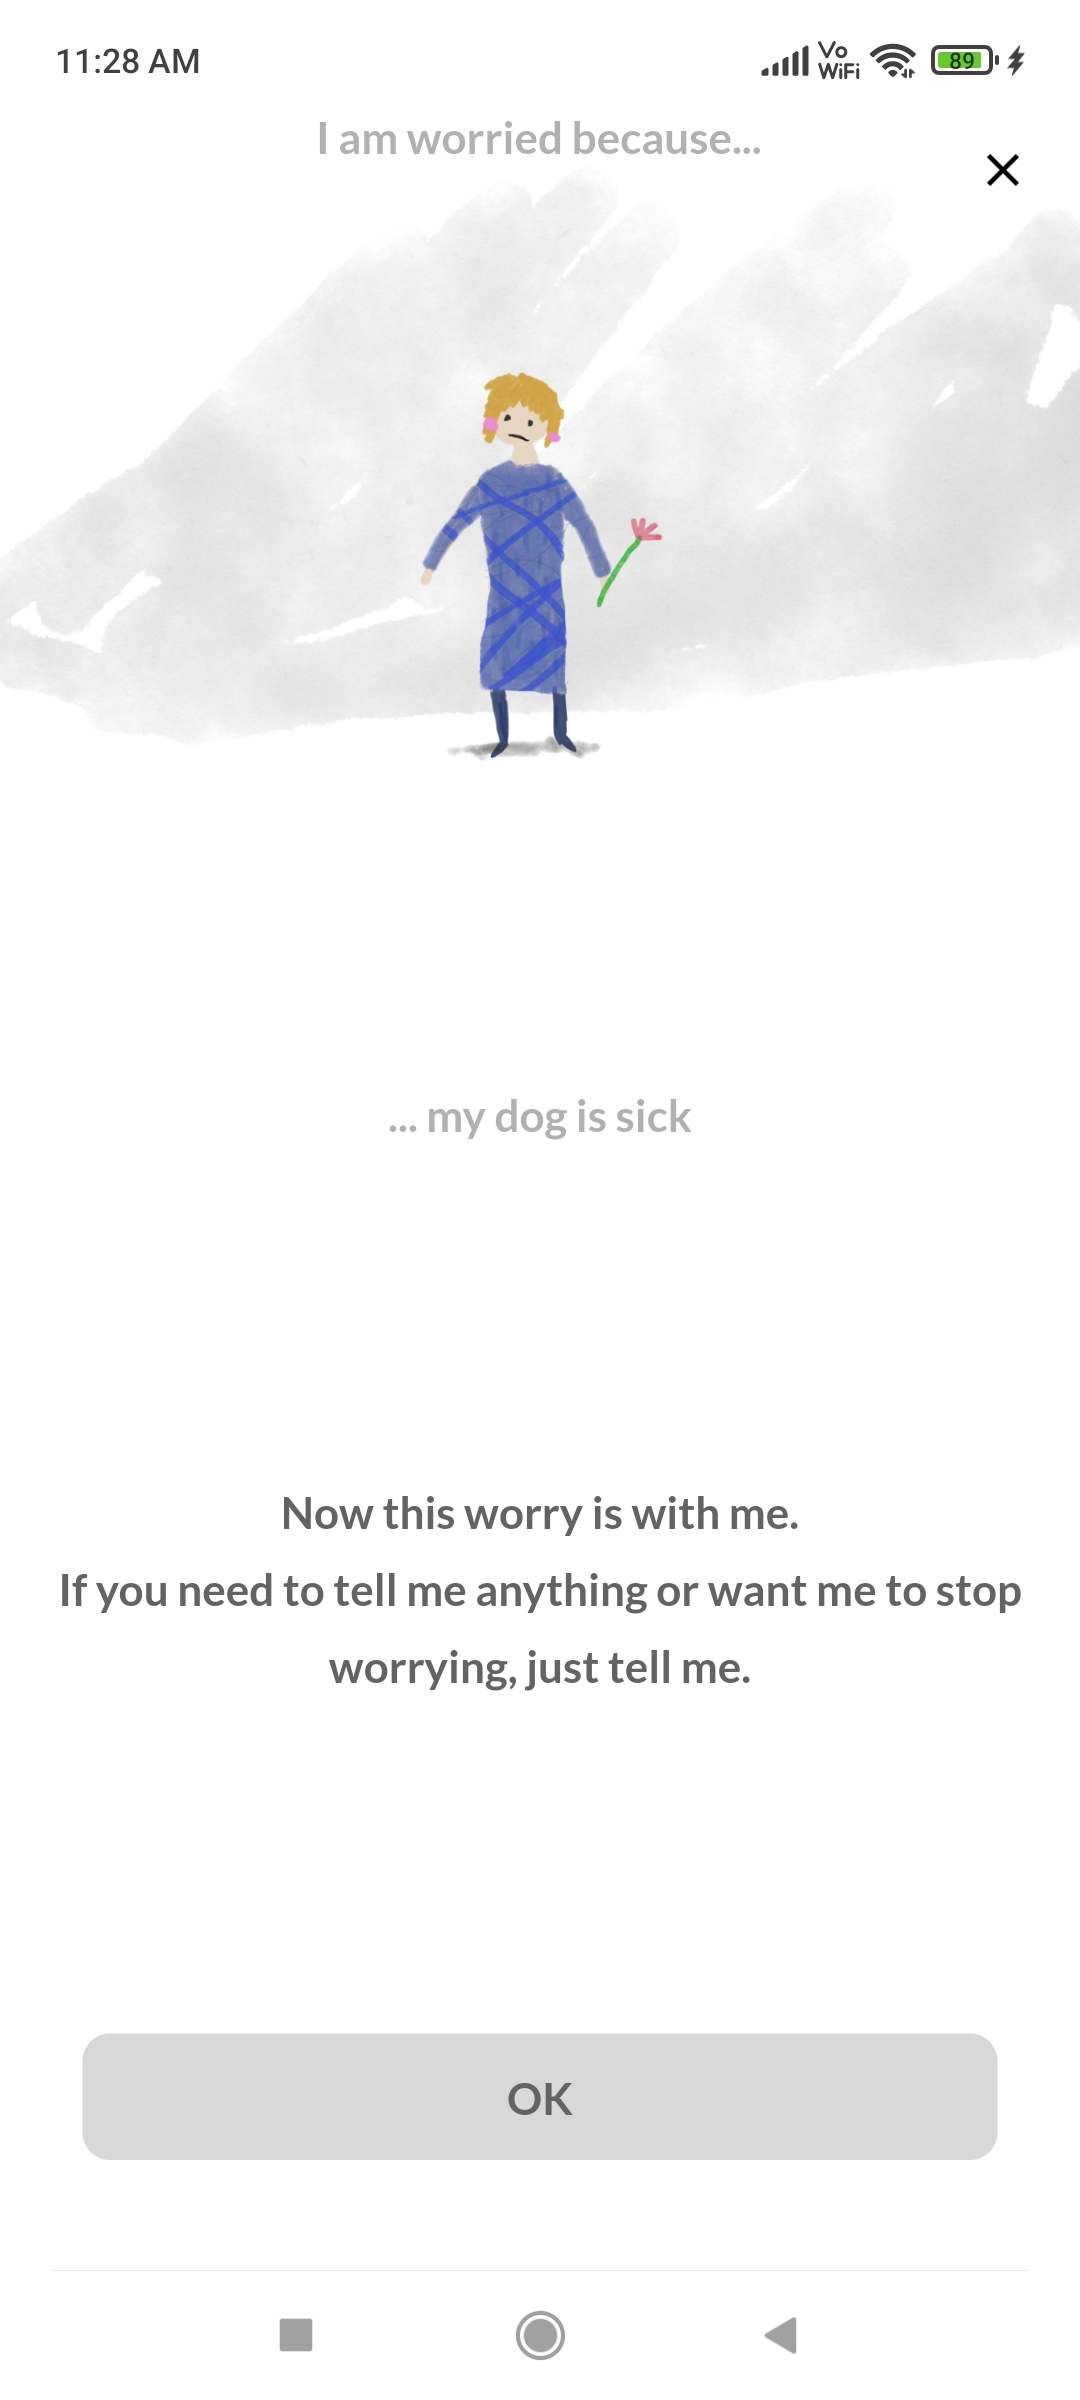 Worrydolls lets you tell what's worrying you to any doll, and then does the worrying for you